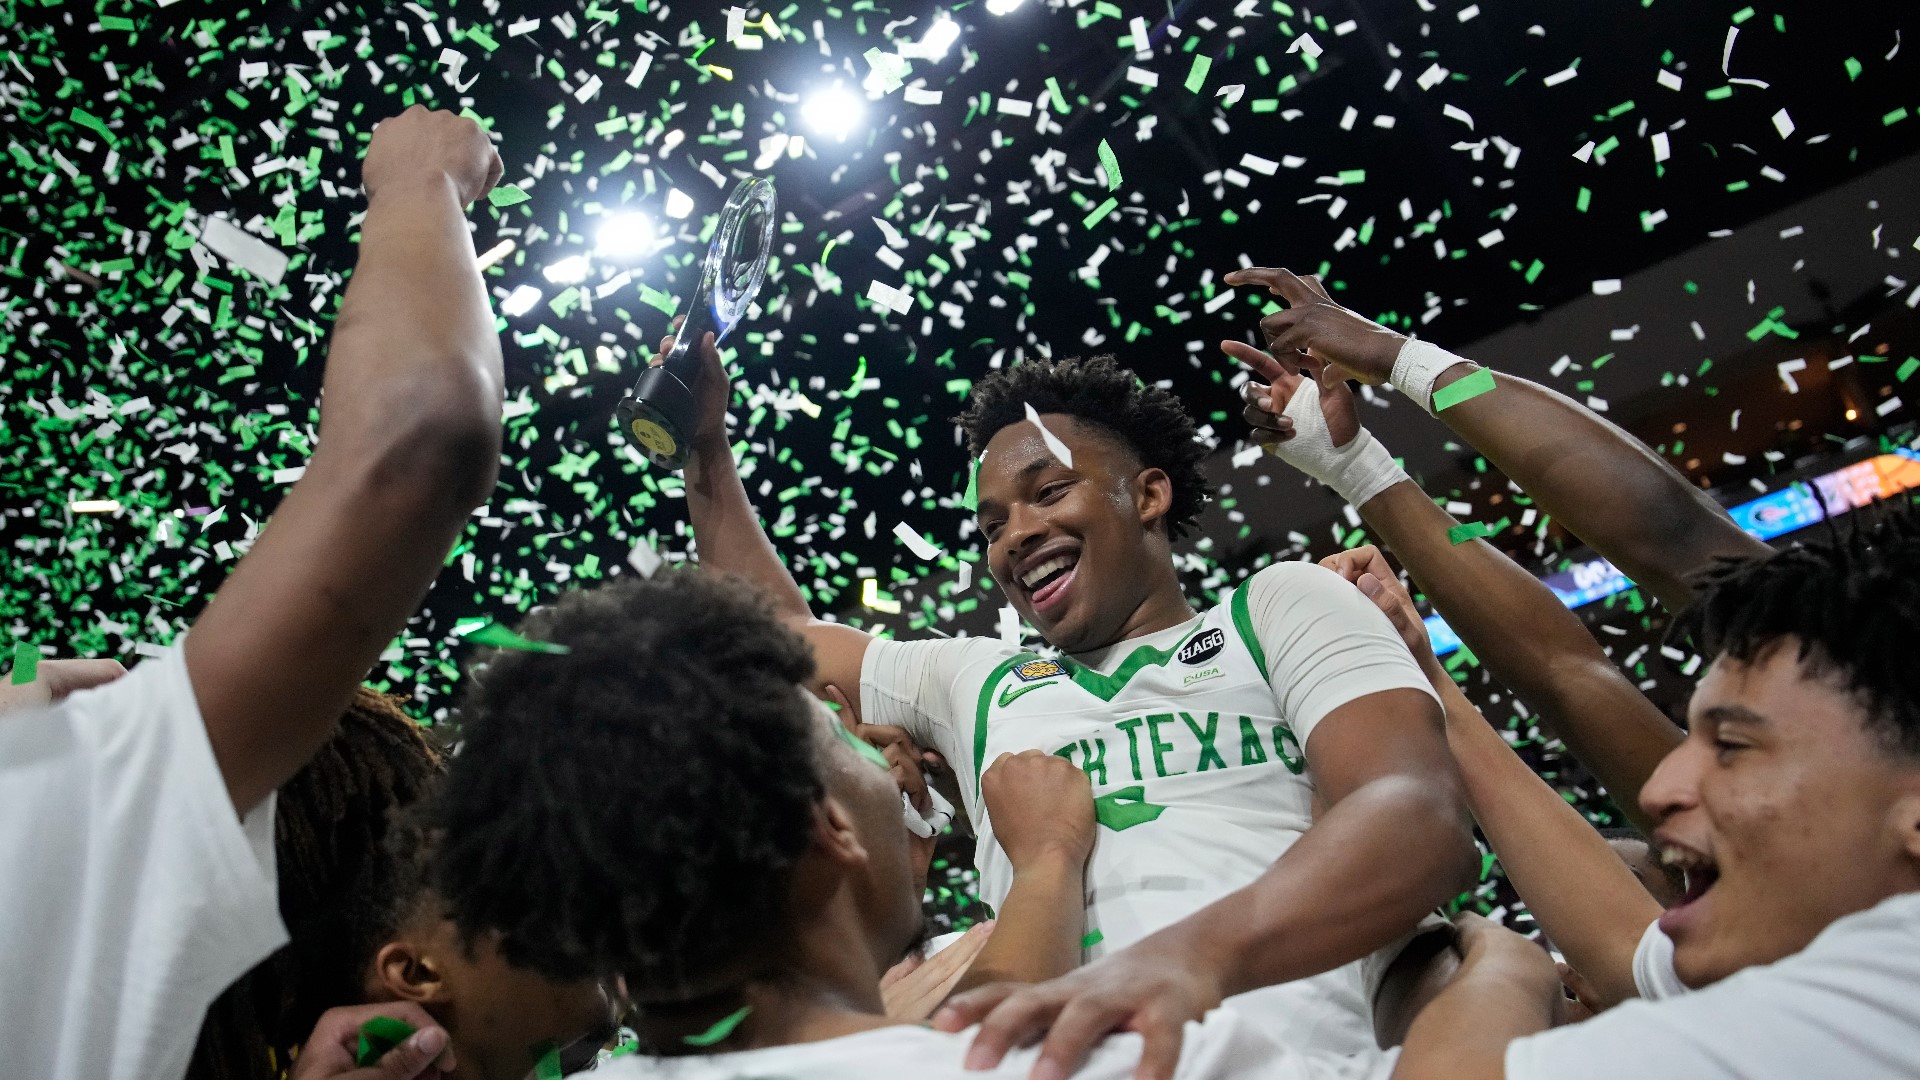 Perry went from having no Division I offers out of high school, to leading the Mean Green to their first NIT title while winning tournament MVP.